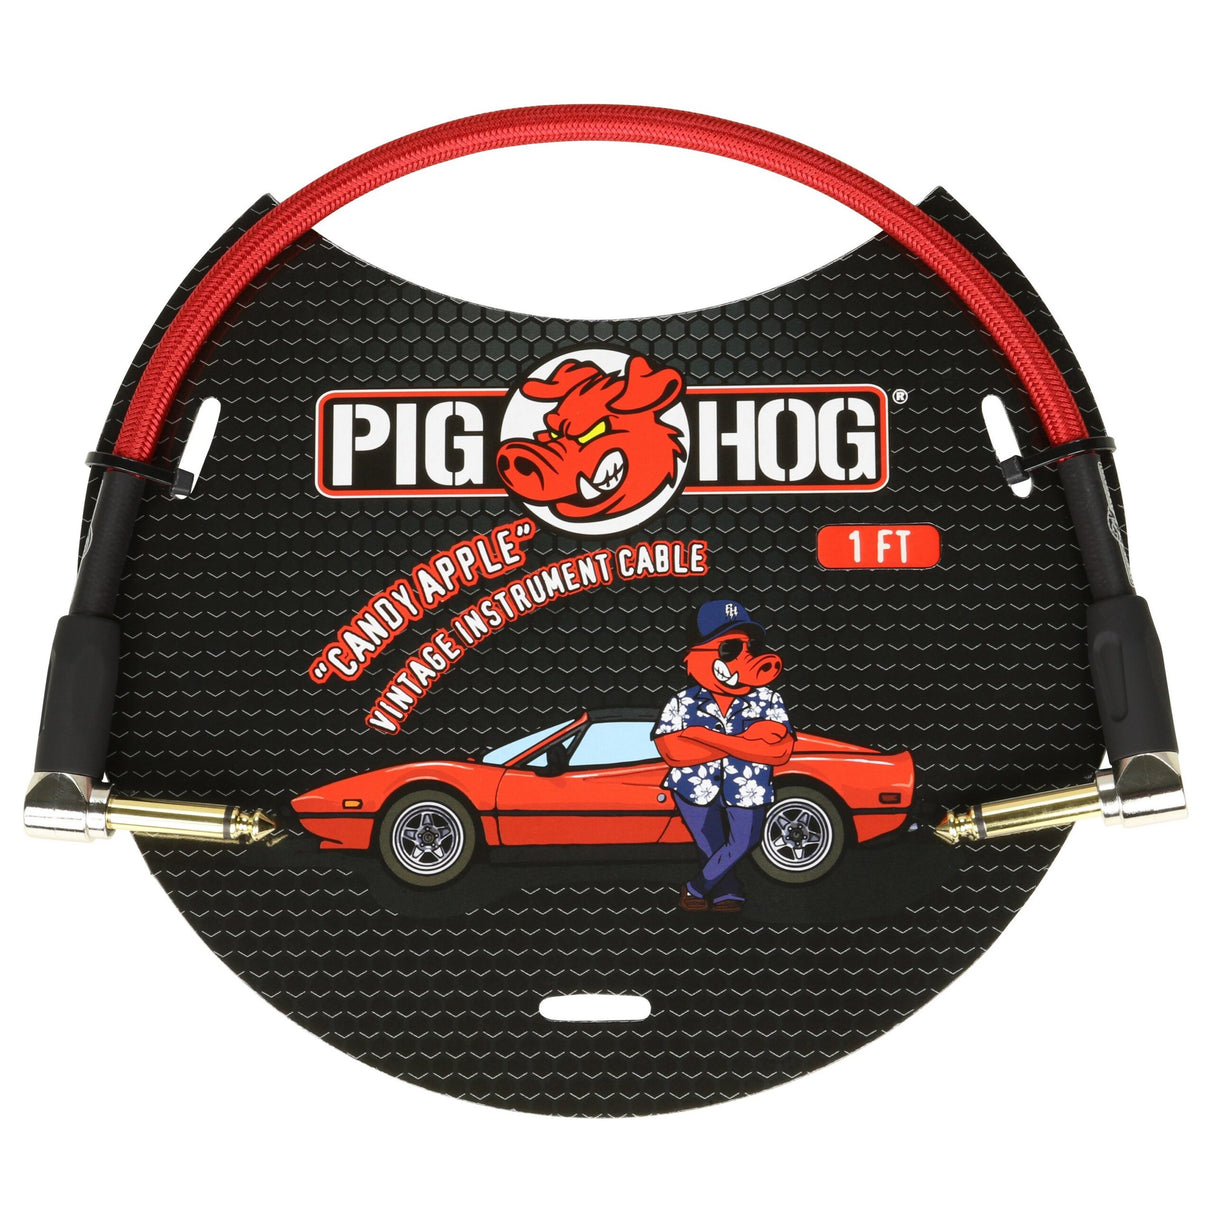 Pig Hog PCH1CAR "Candy Apple Red" 1ft Right Angled Patch Cables